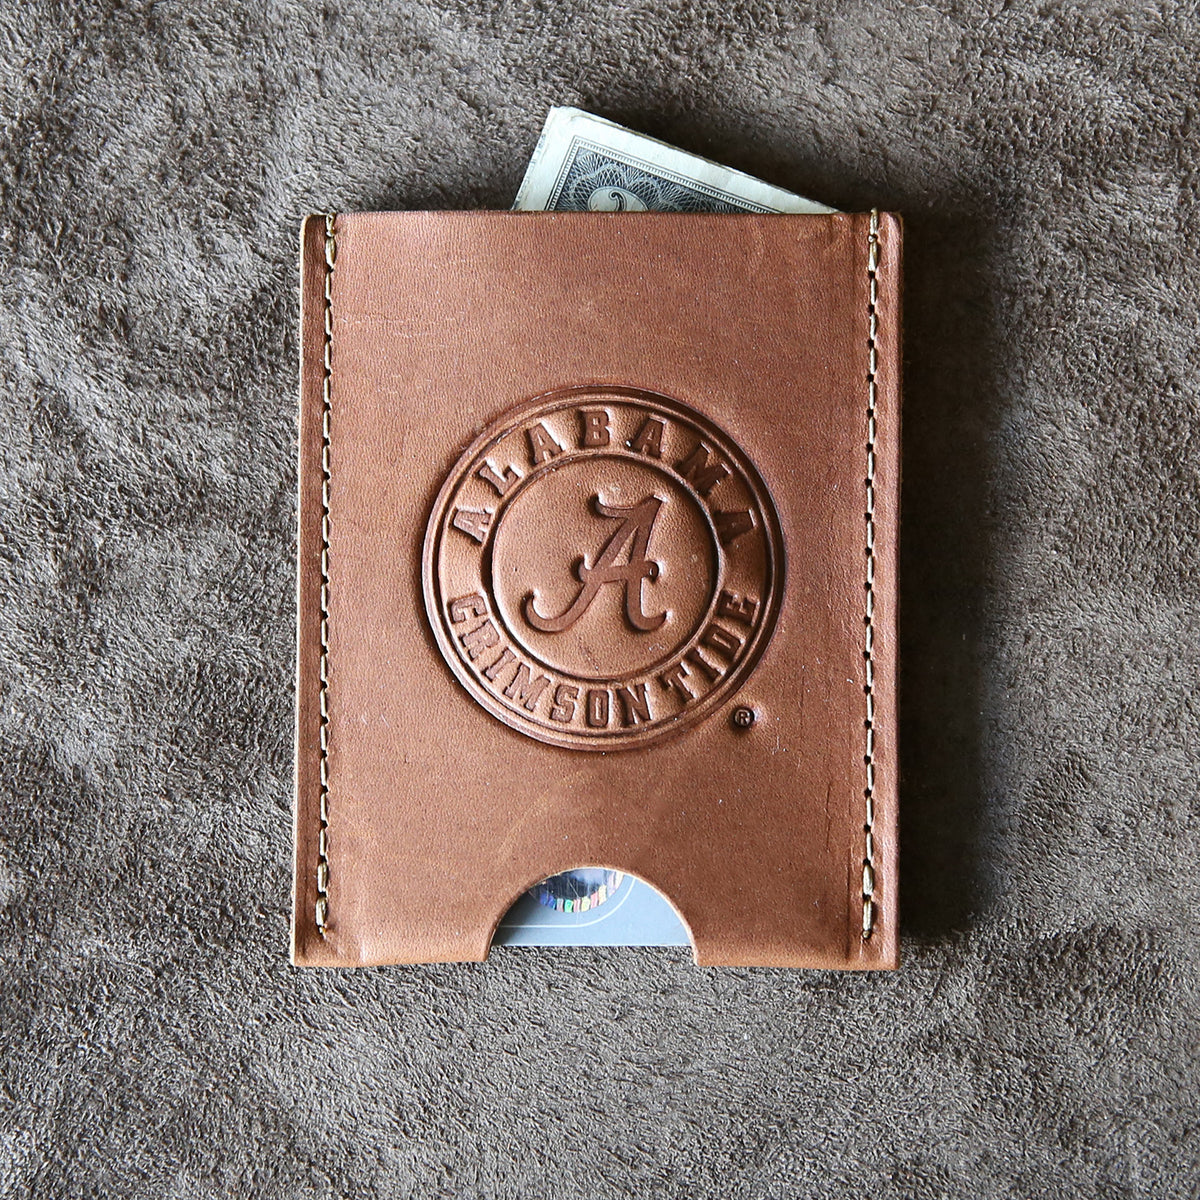 The Officially Licensed Crimson Tide Jefferson Personalized Fine Leather Card Holder Wallet